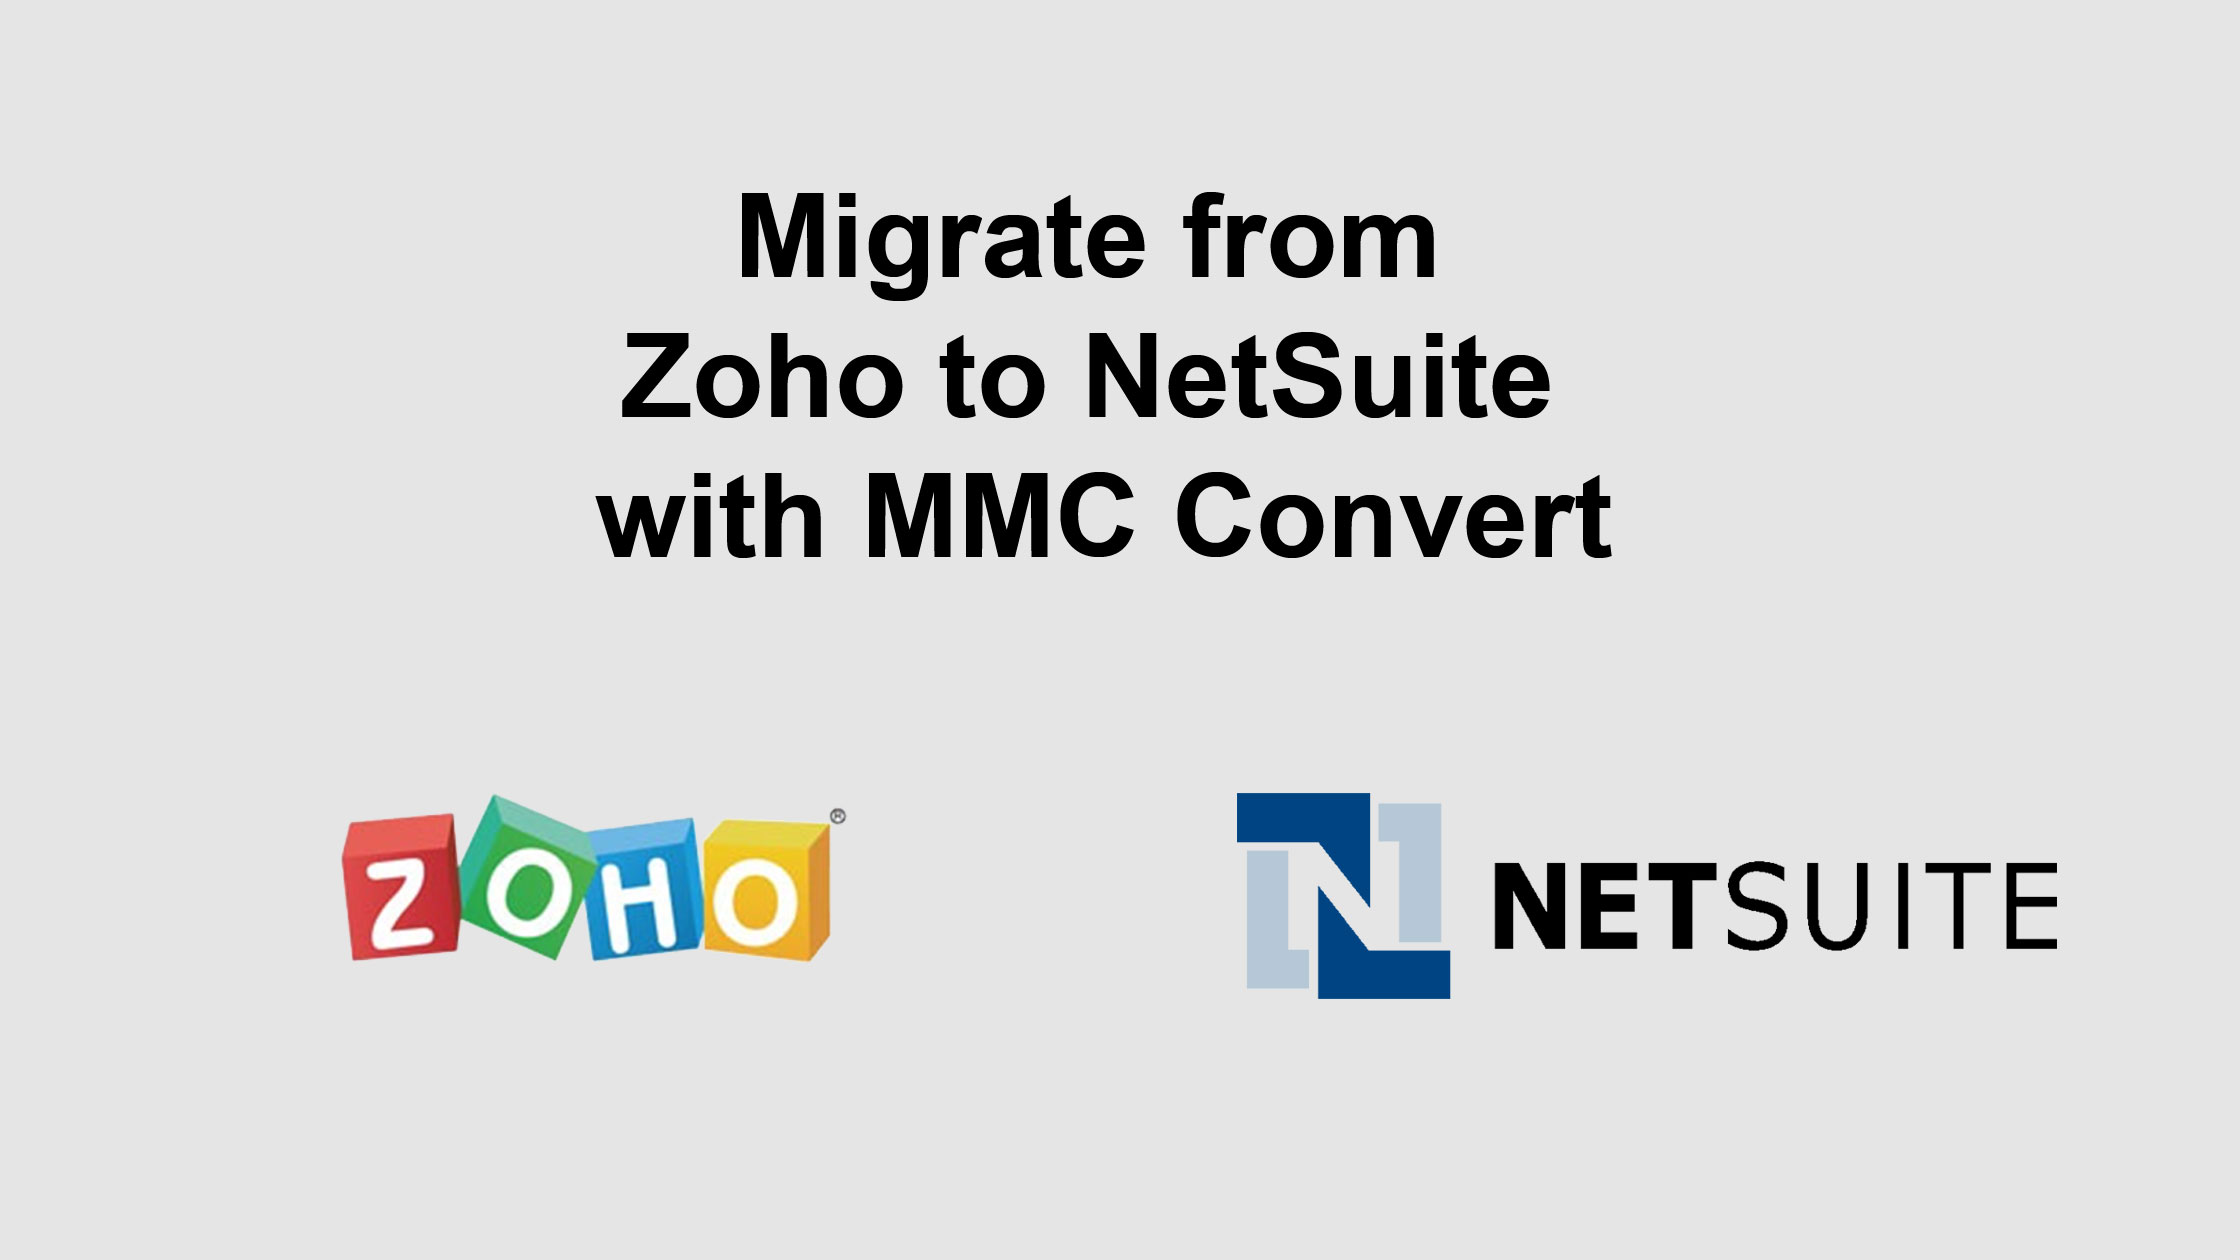 Migrate from Zoho to NetSuite with MMC Convert